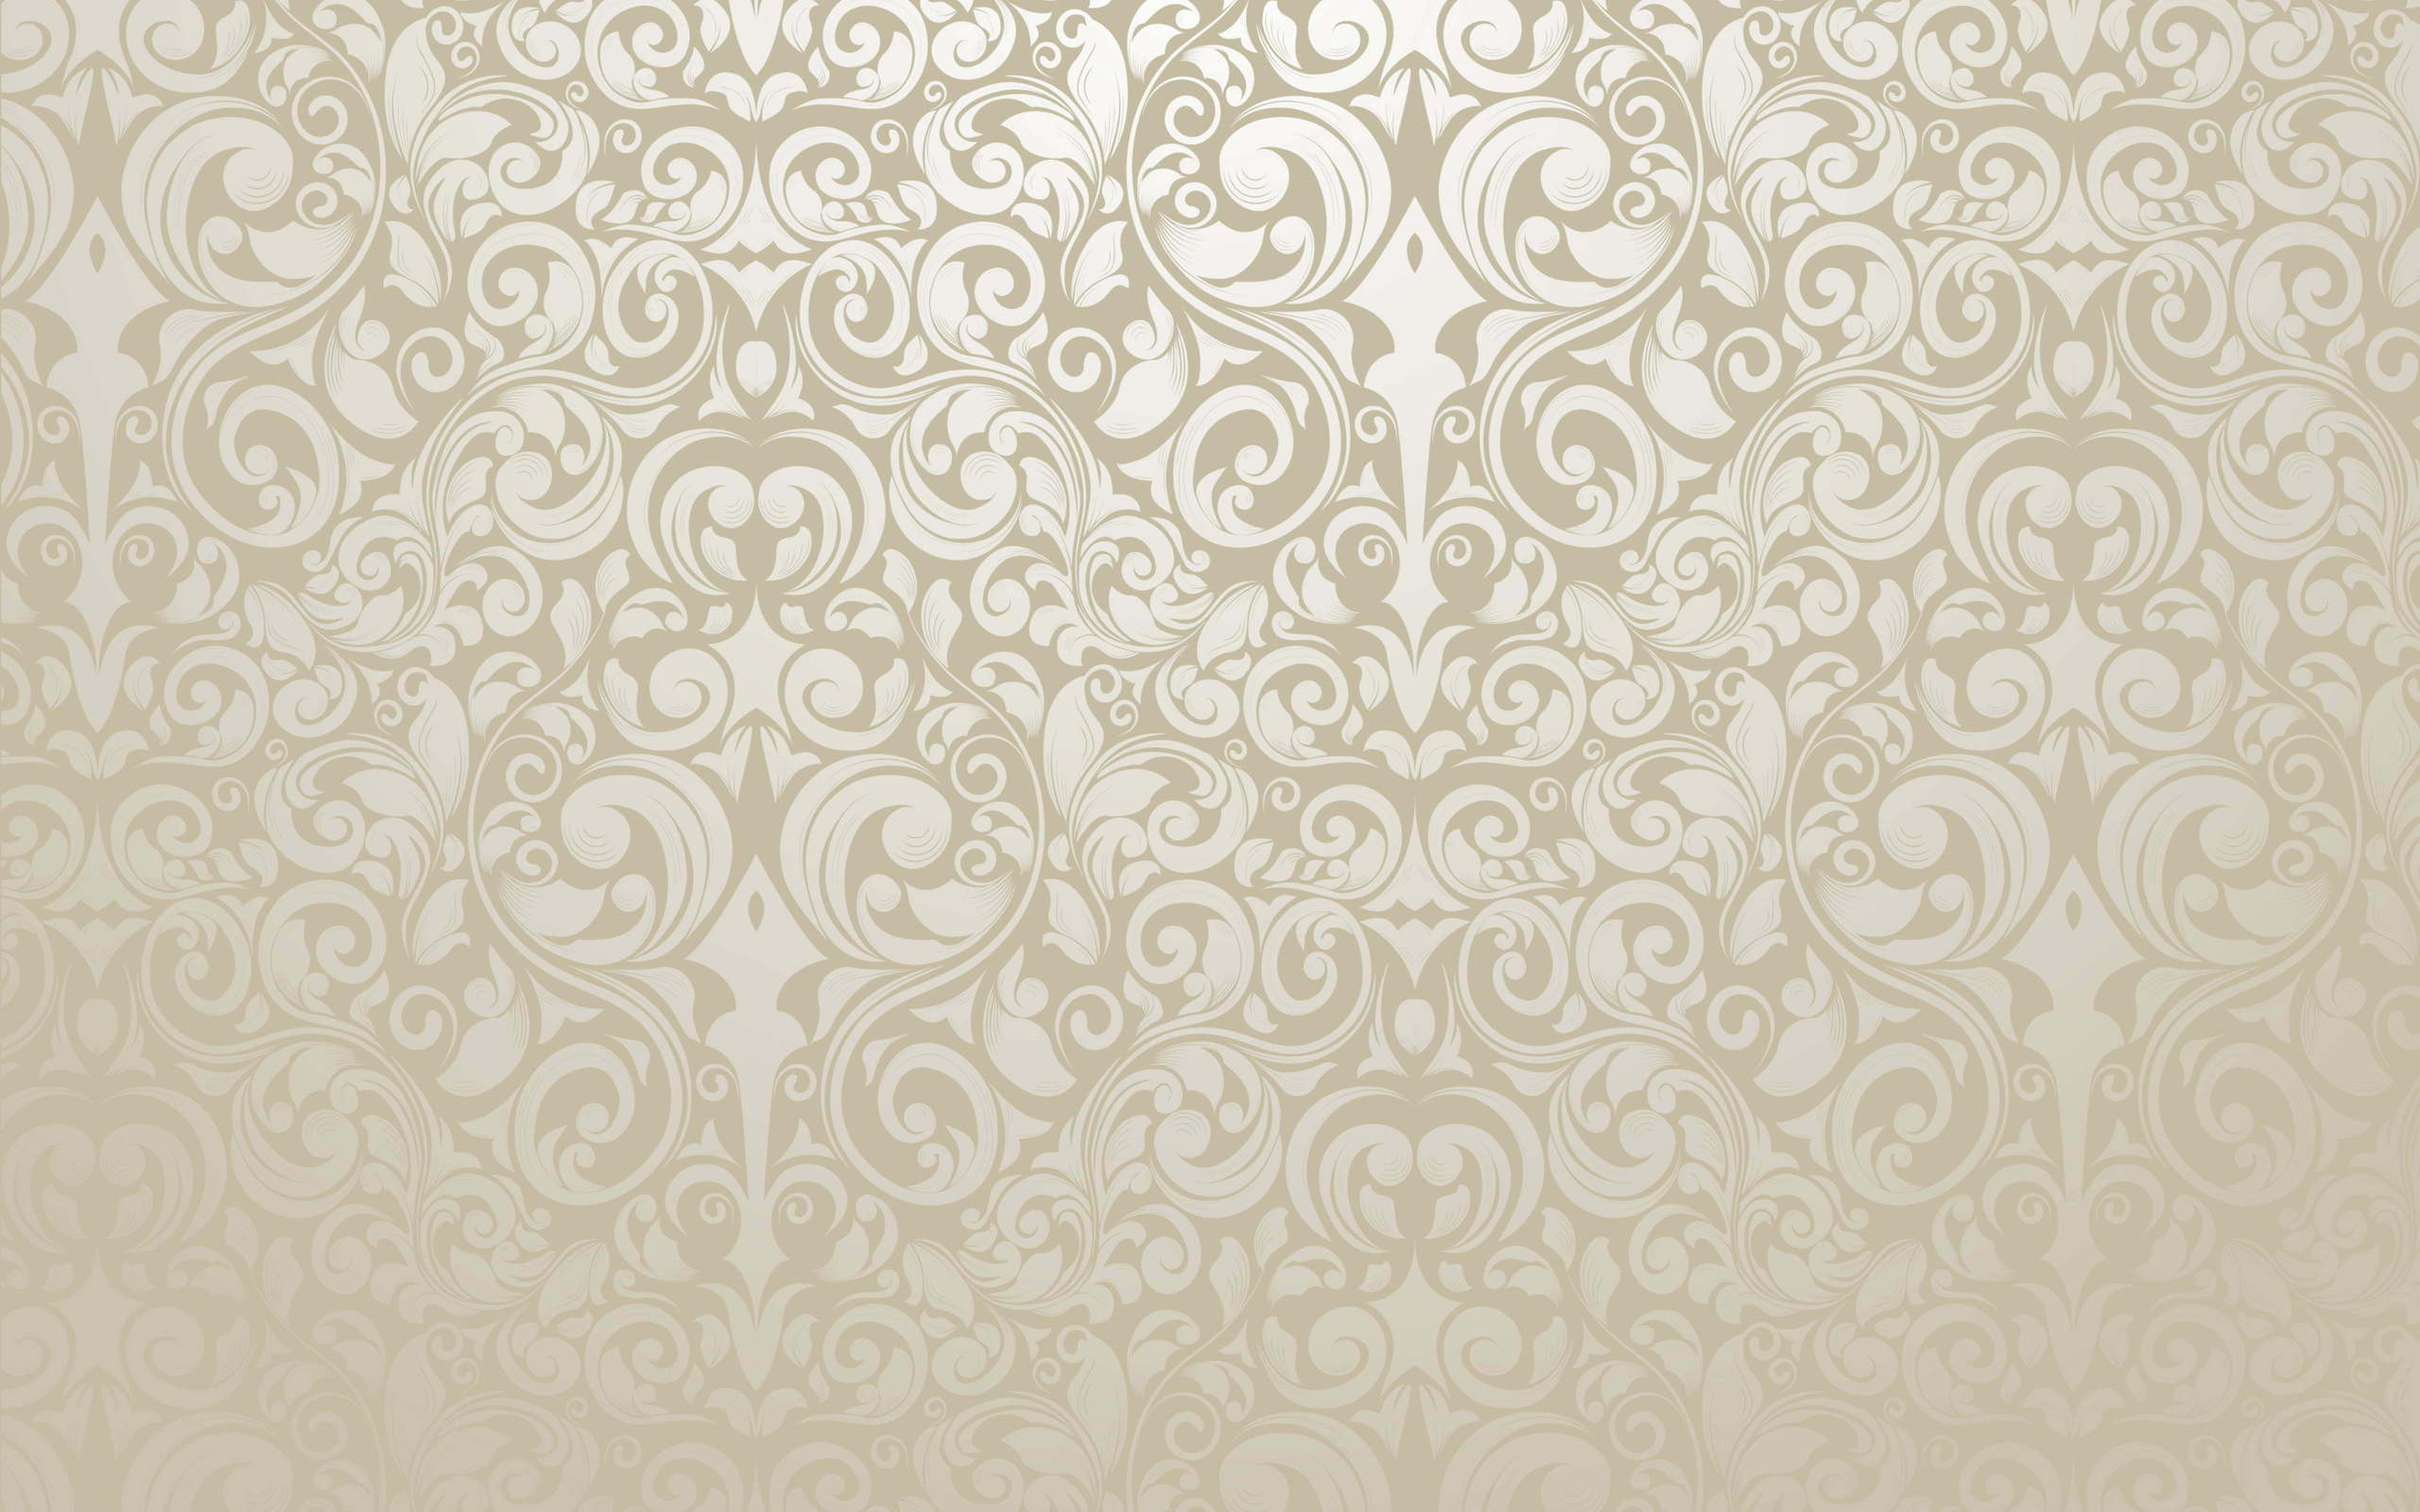 Free HD Wallpaper Pattern Vintage for Card Design HD Wallpapers for